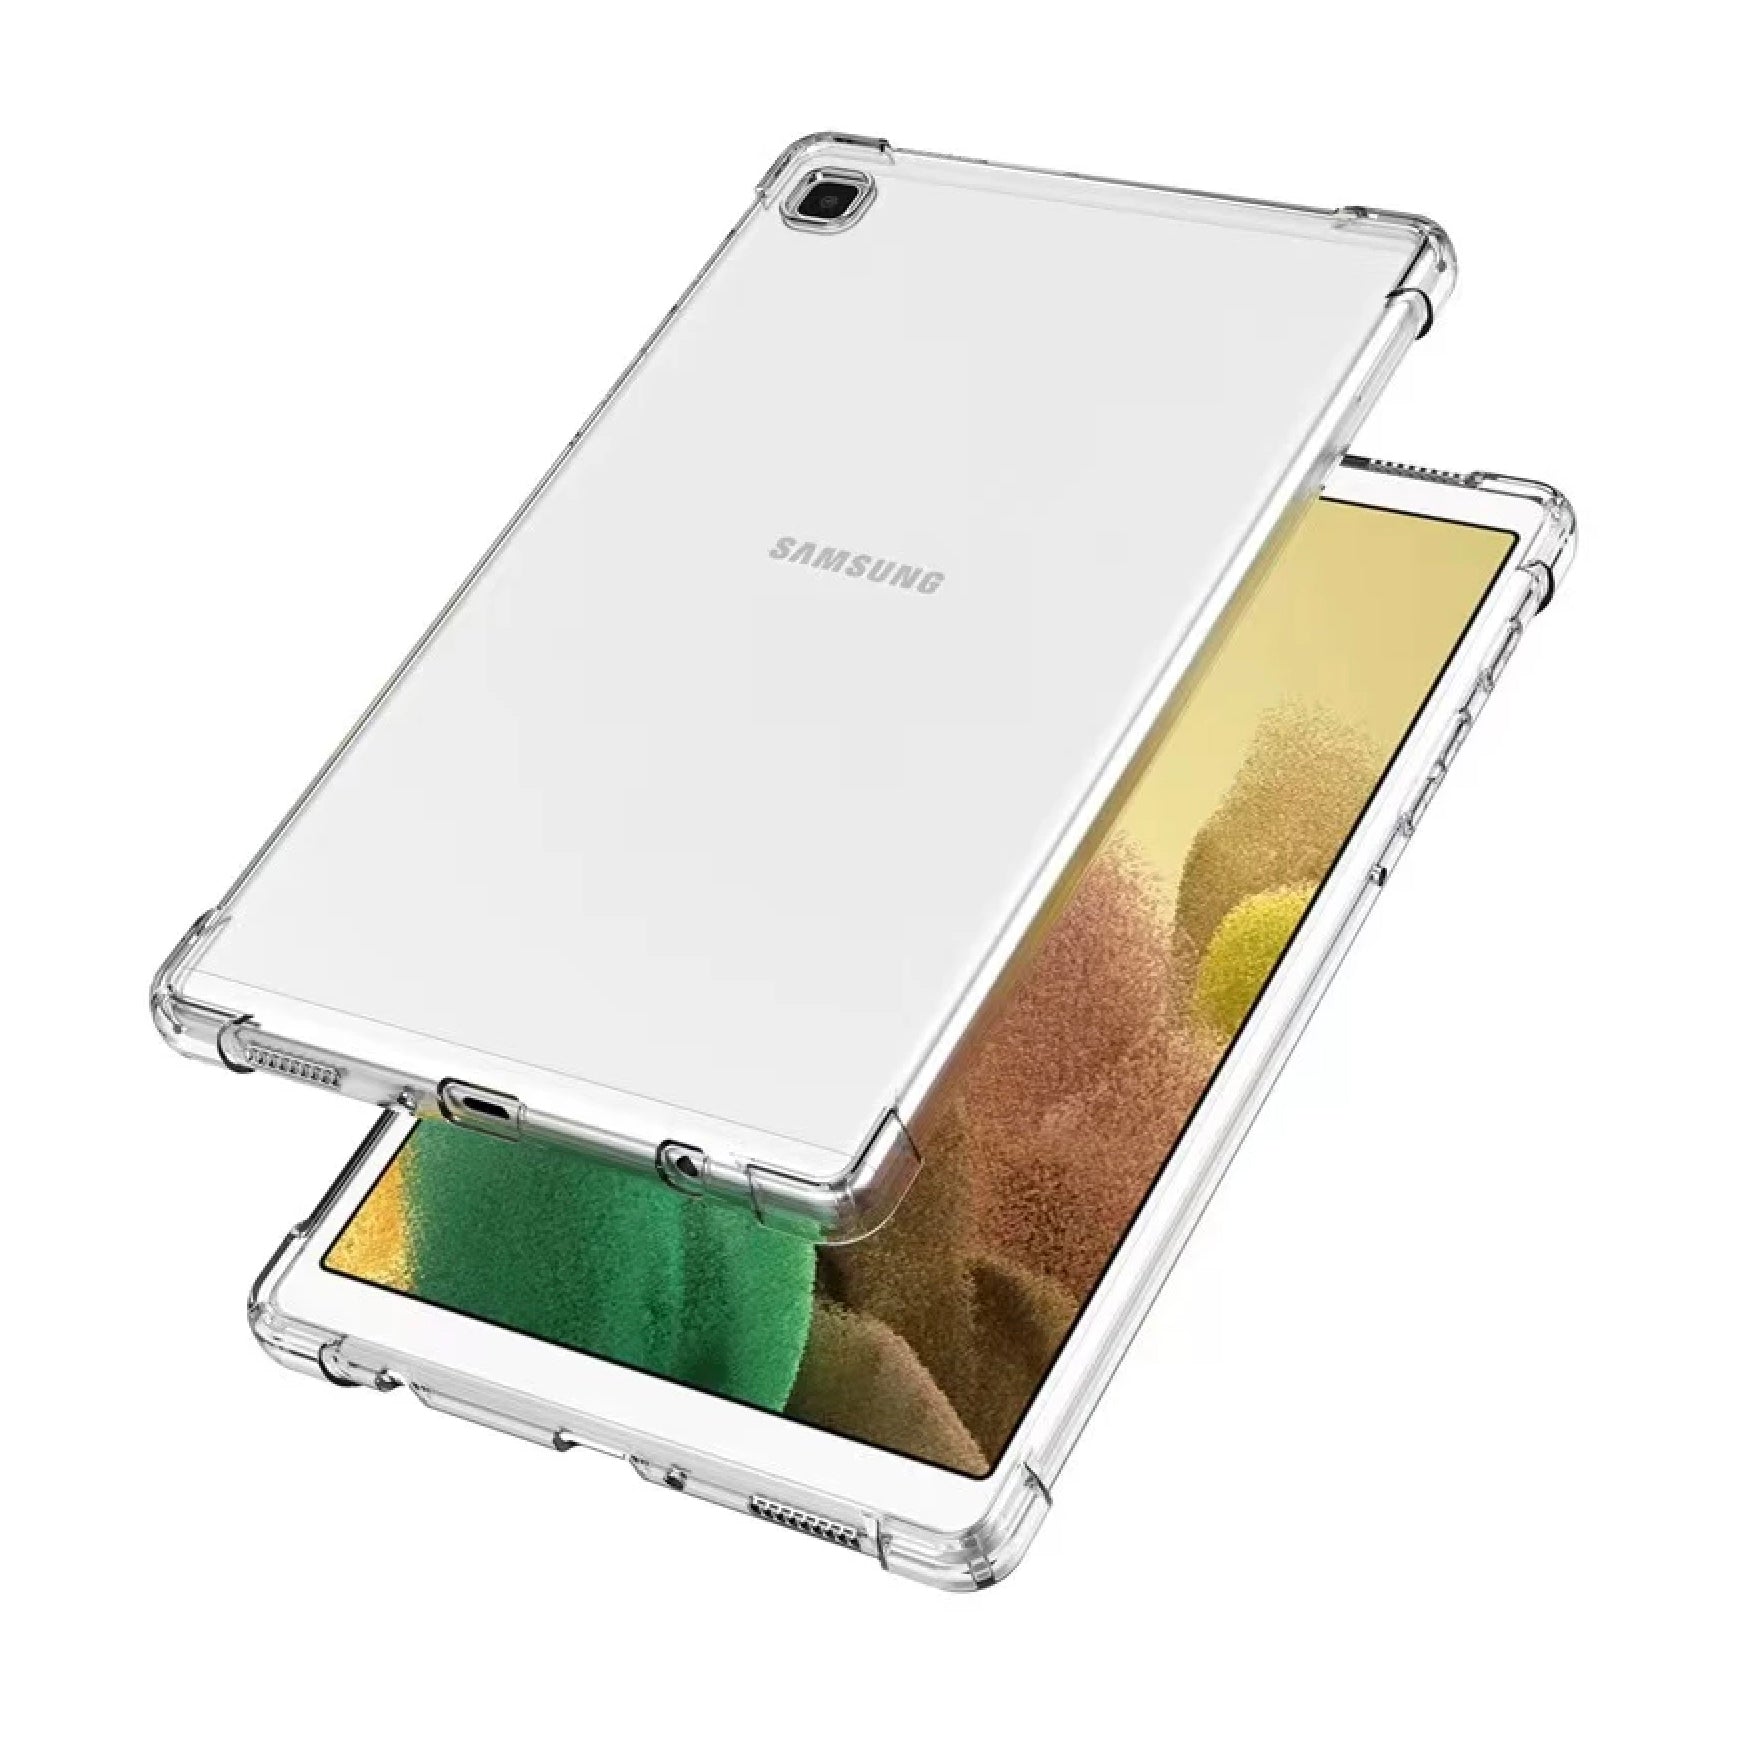 Clear Soft TPU Cover For Samsung Galaxy Tab A7 Lite ShockProof Bumper Case-Samsung Tablet Cases & Covers-First Help Tech